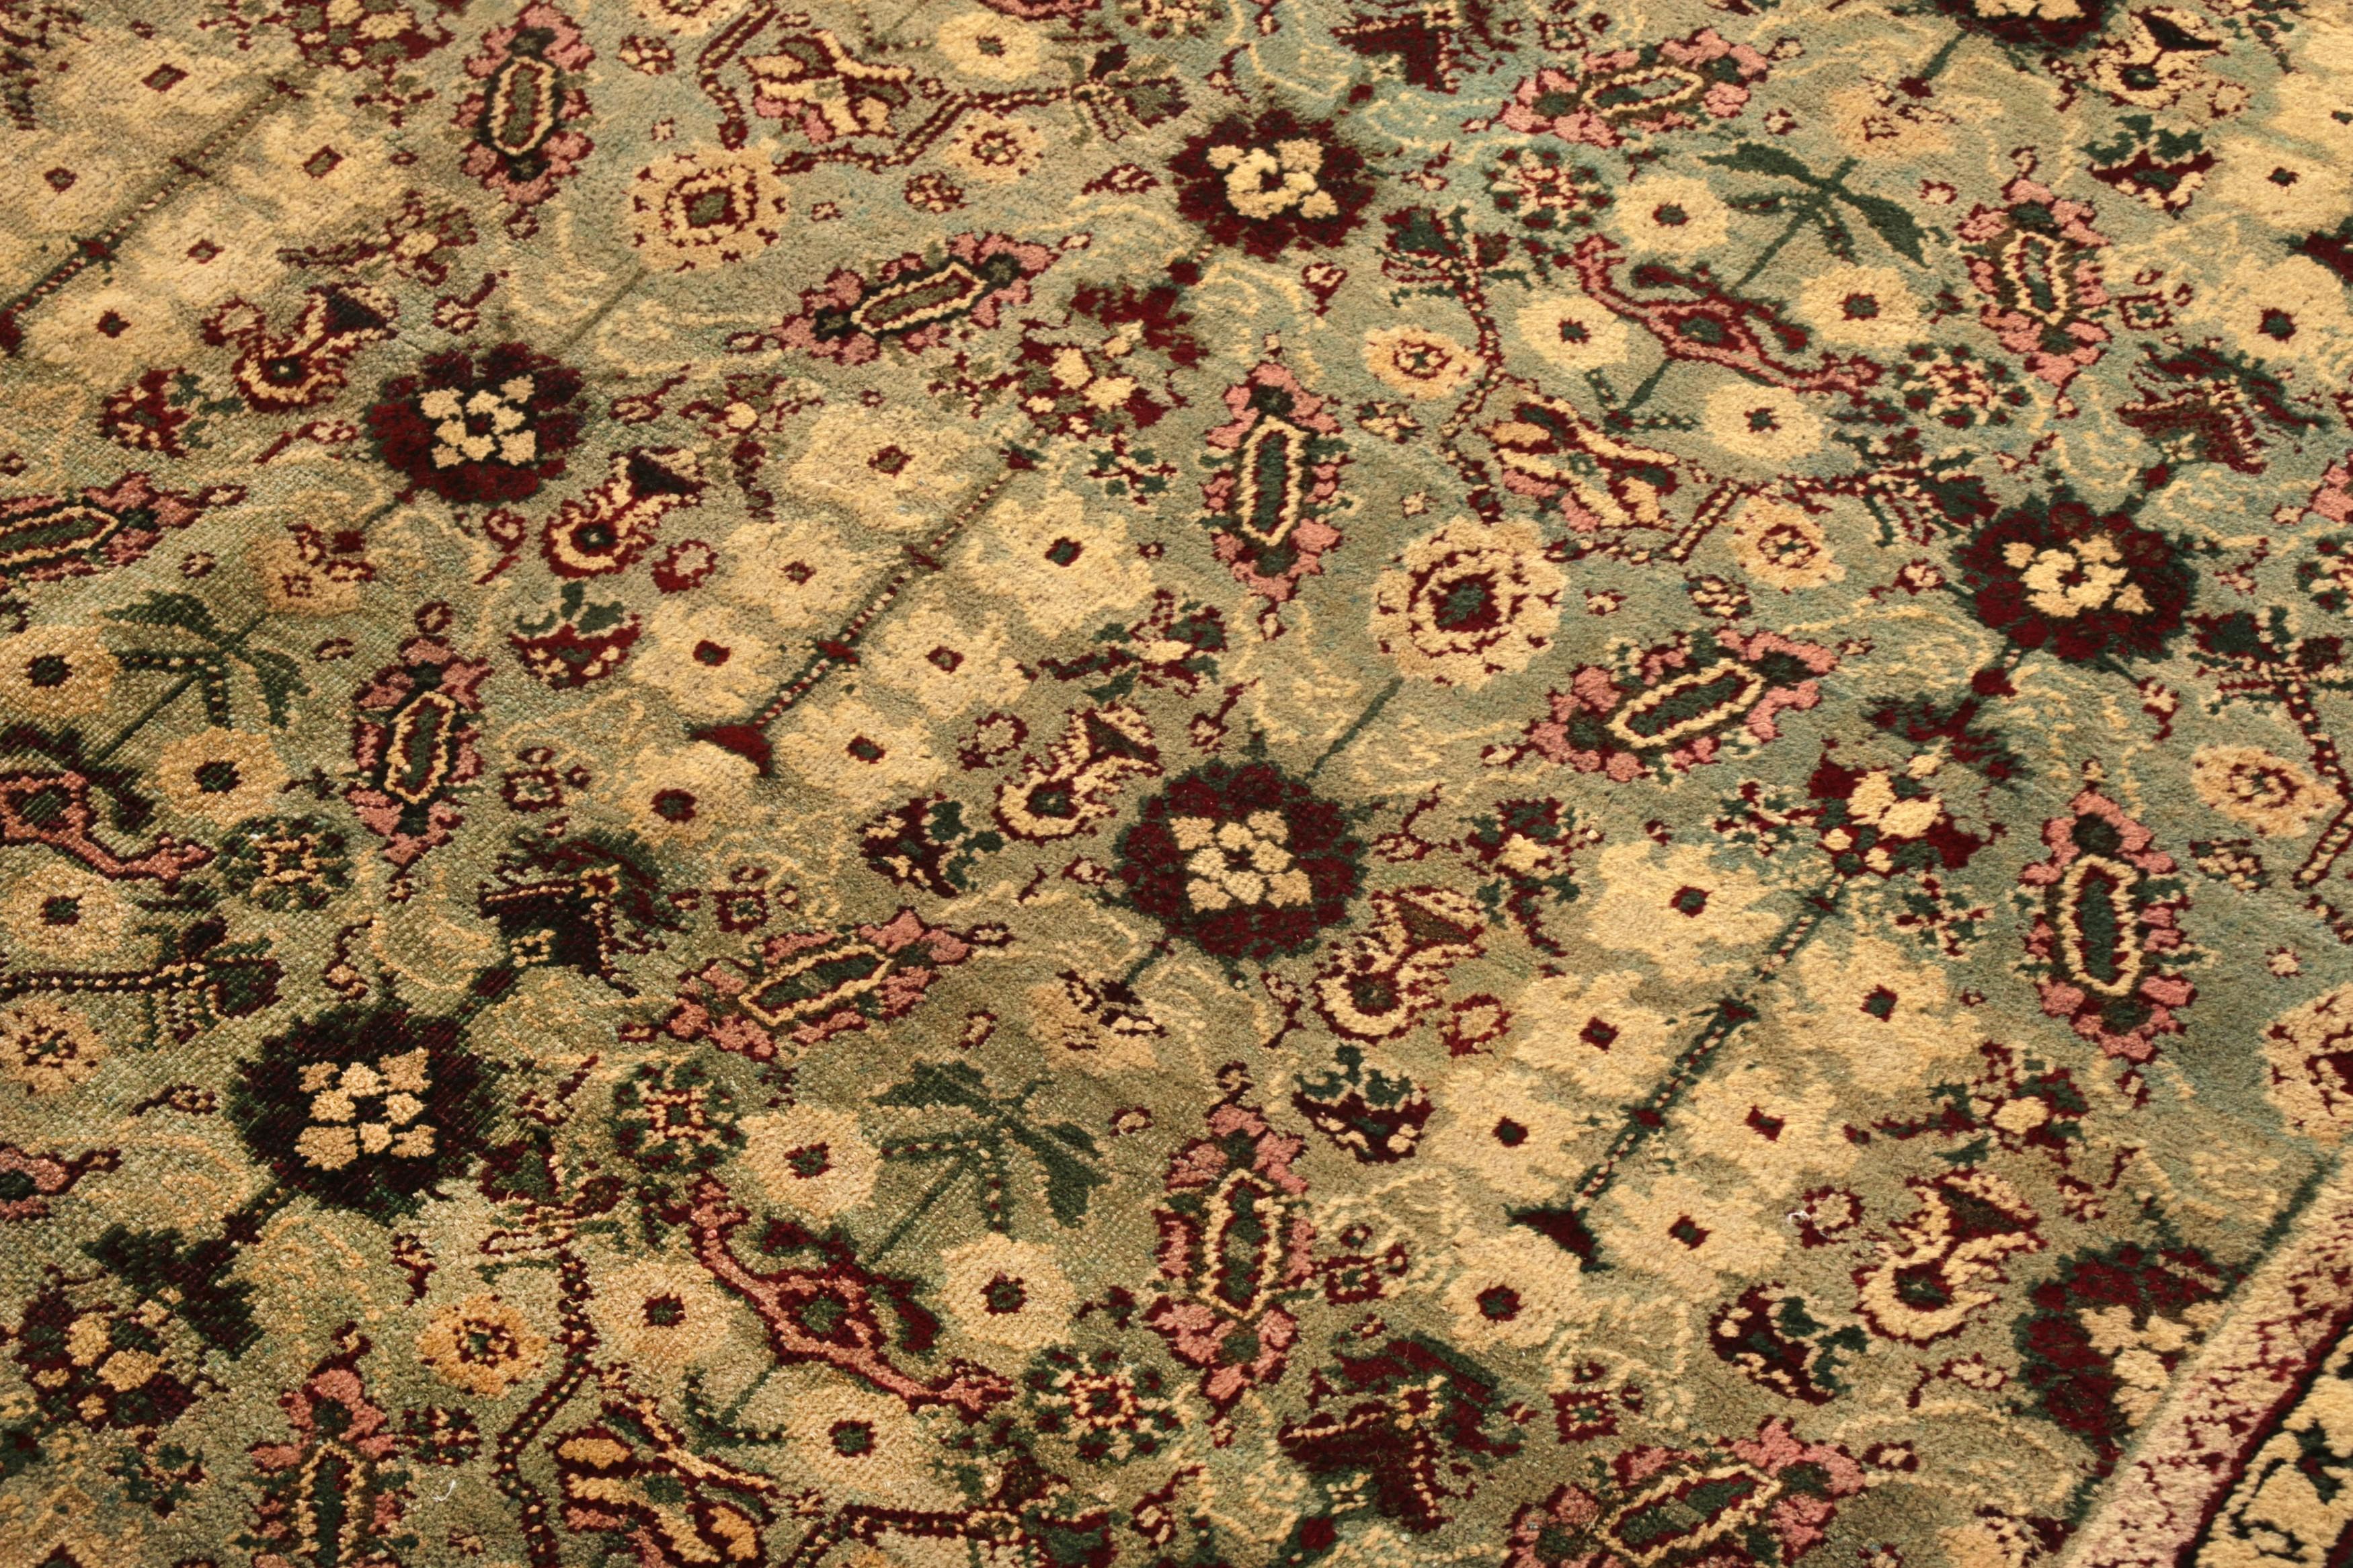 Hand-Knotted Antique Amritsar Rug in Beige-Brown Floral Pattern In Good Condition For Sale In Long Island City, NY